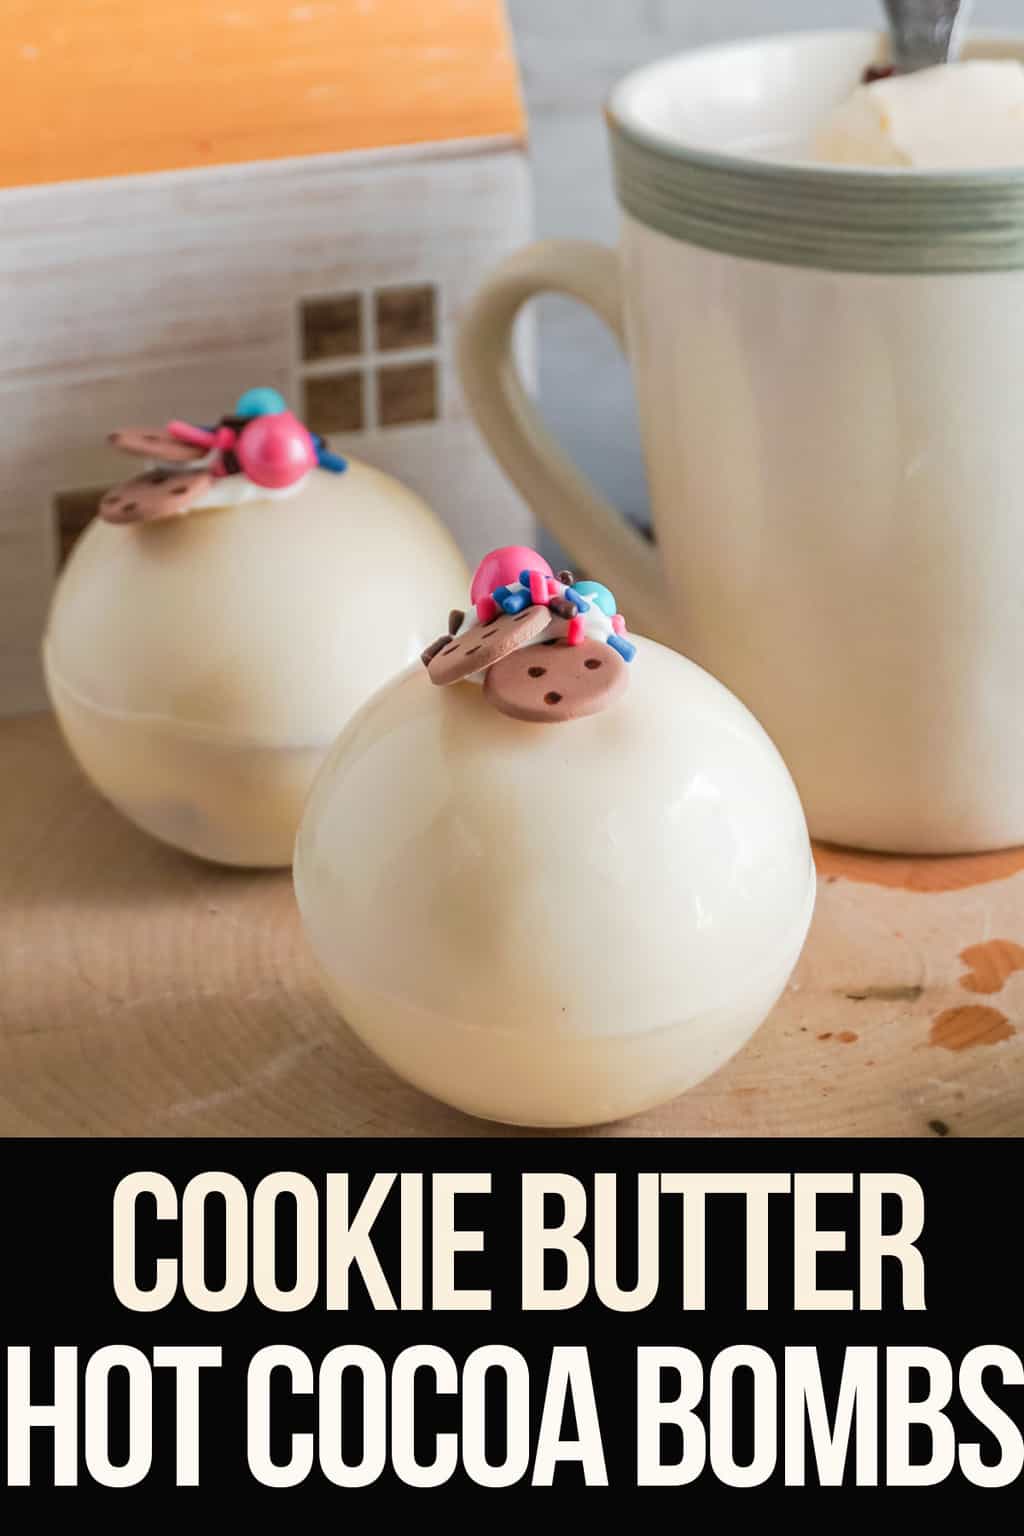 Cookie Butter flavored Hot Cocoa Bombs